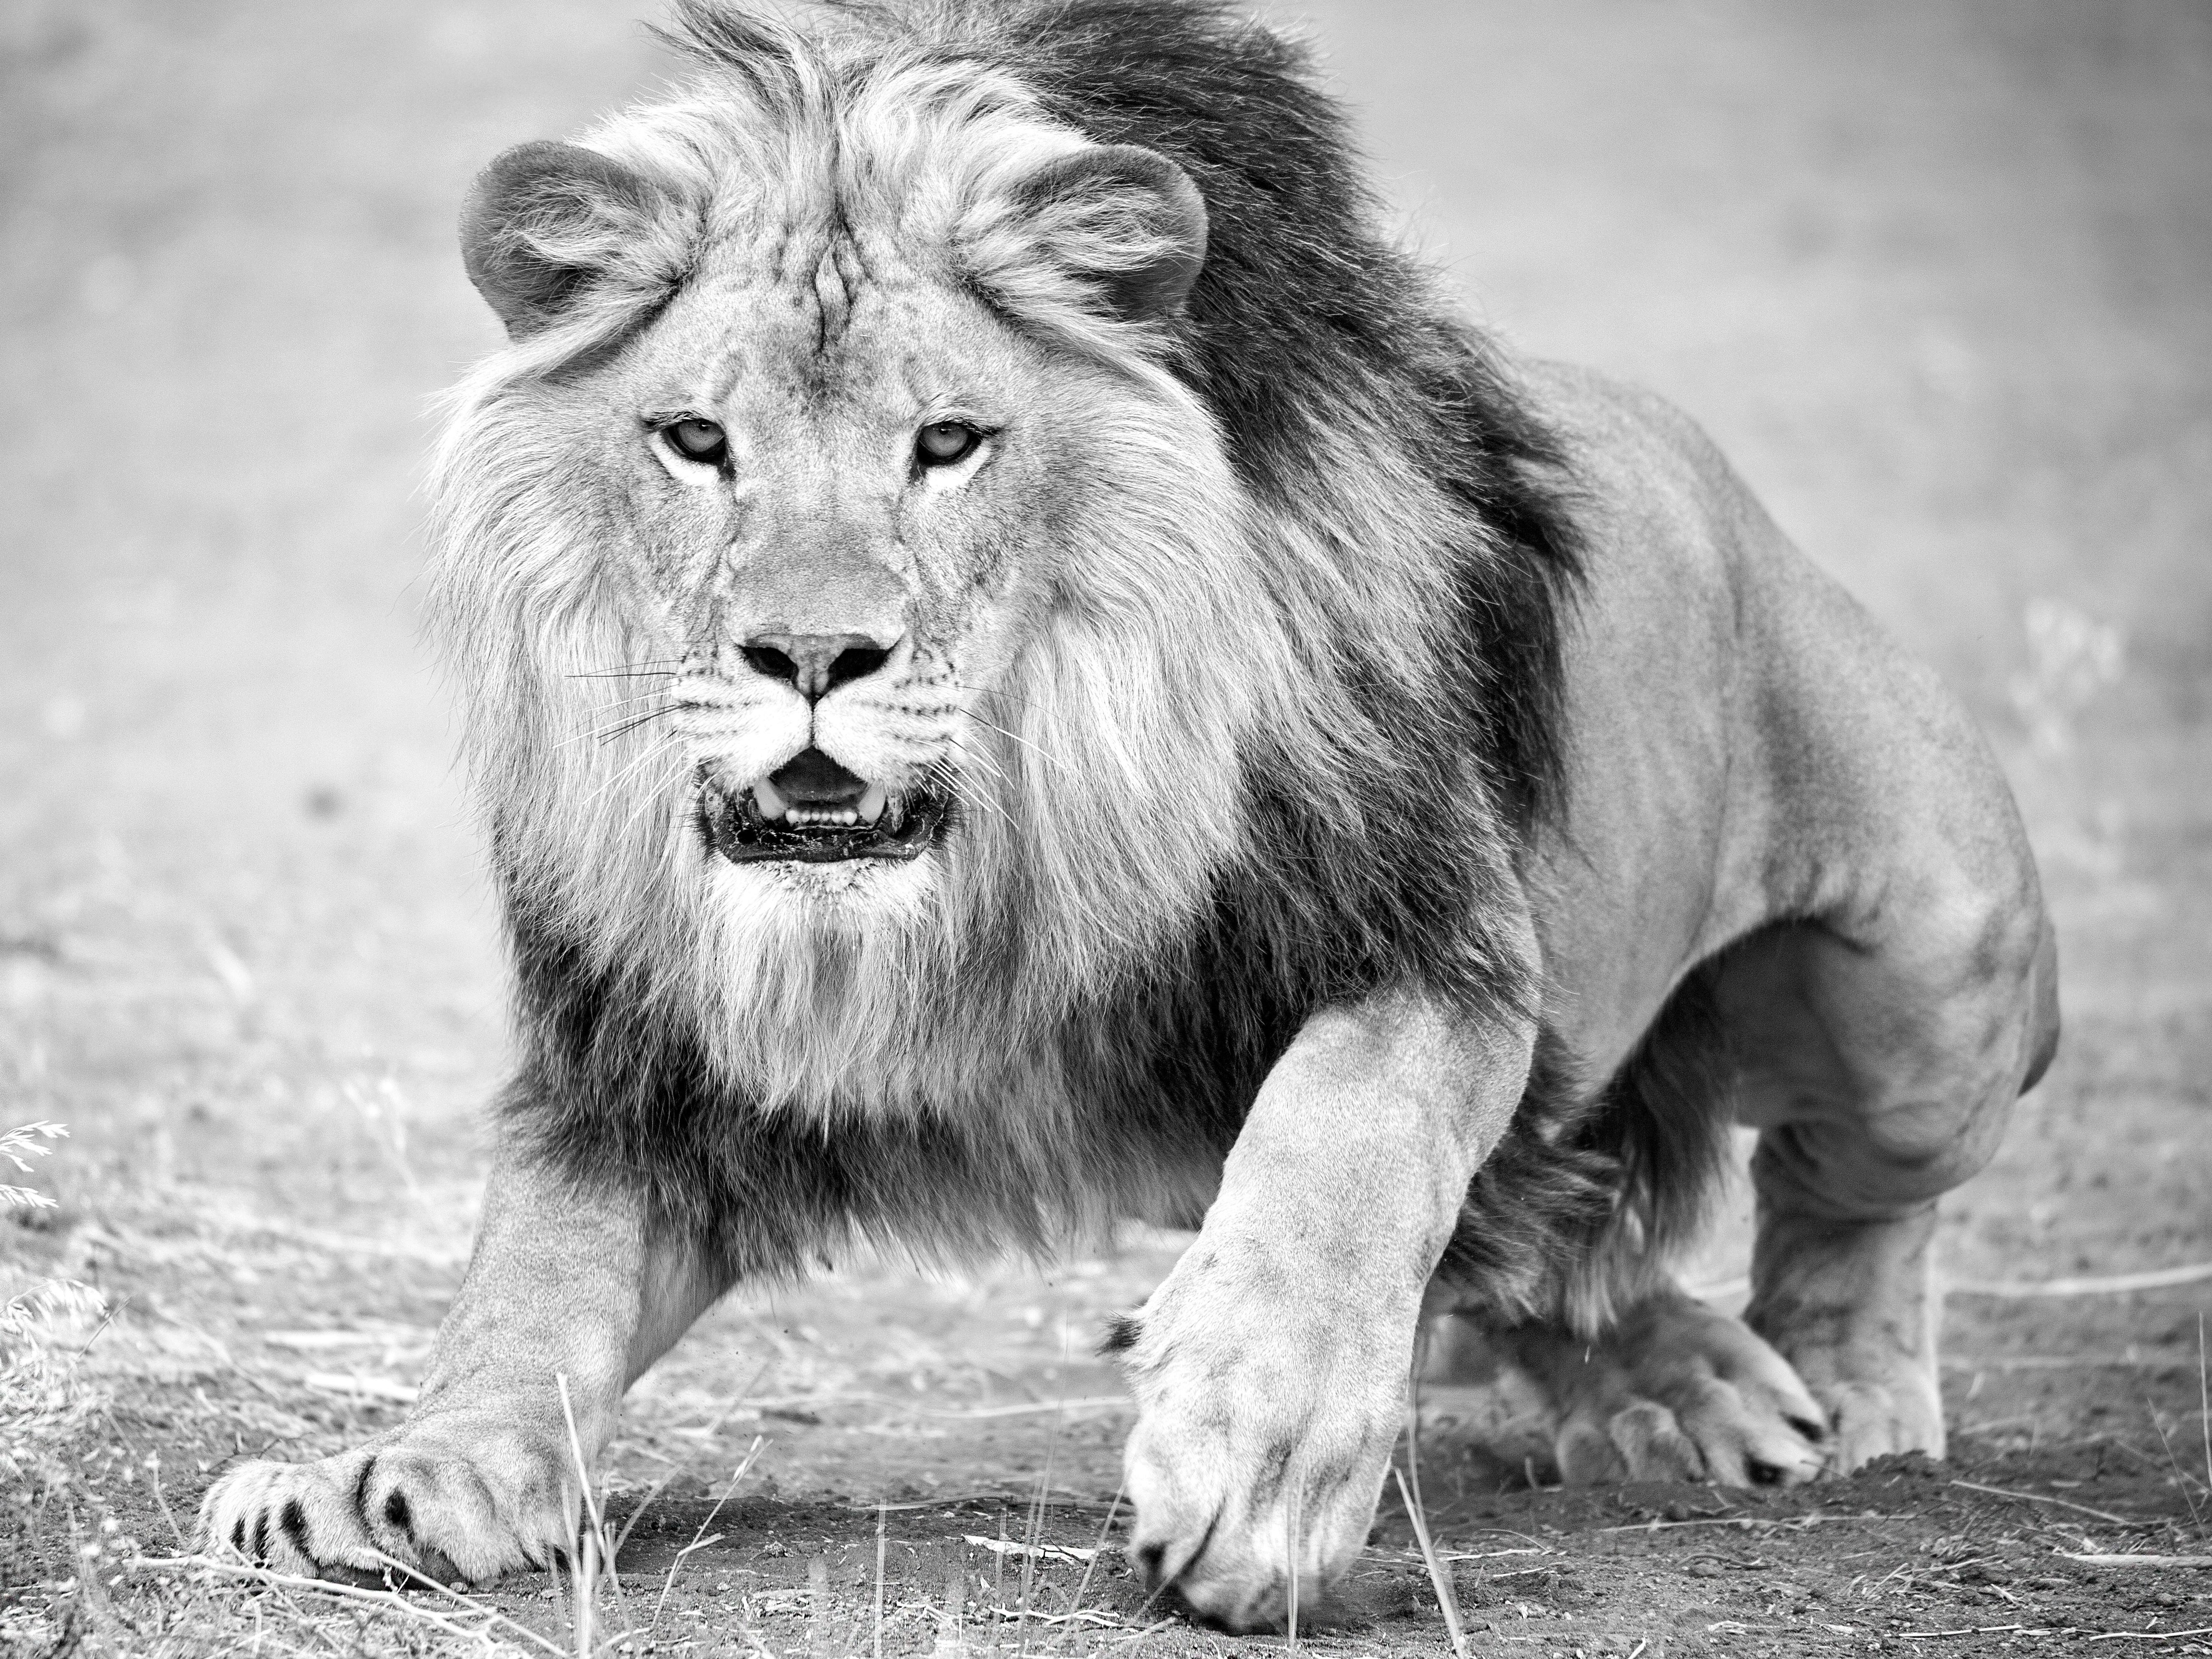 Shane Russeck Animal Print - Black & White Photography, Lion Photograph "The Charge" 36x48 Unsigned Print